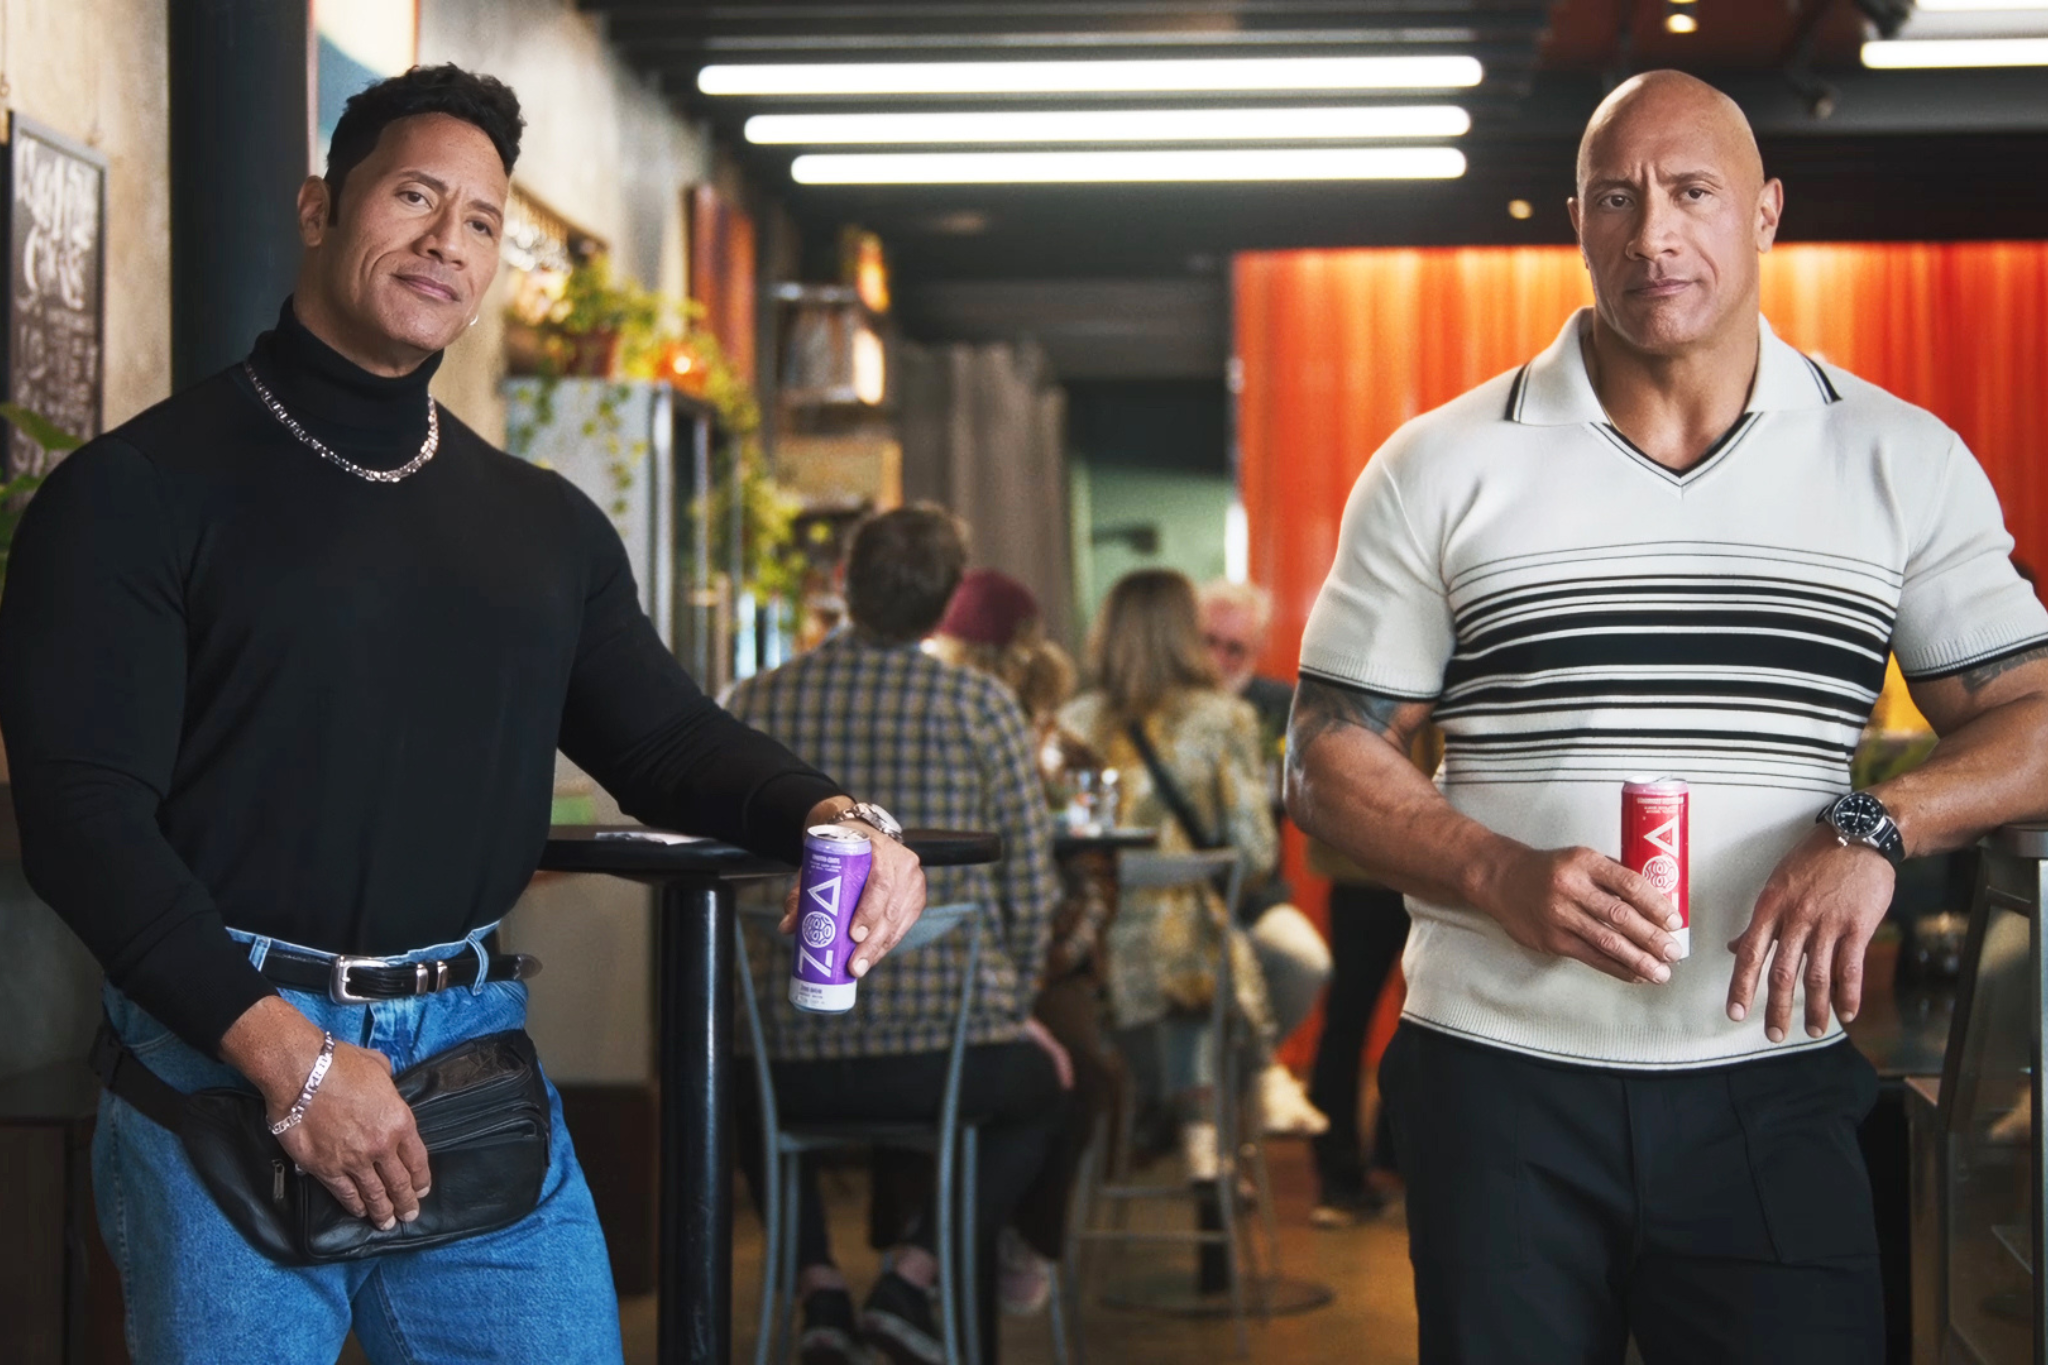 ZOA Energy and Dwayne “The Rock” Johnson Launch New Campaign Packed with BDE: Big Dwayne Energy